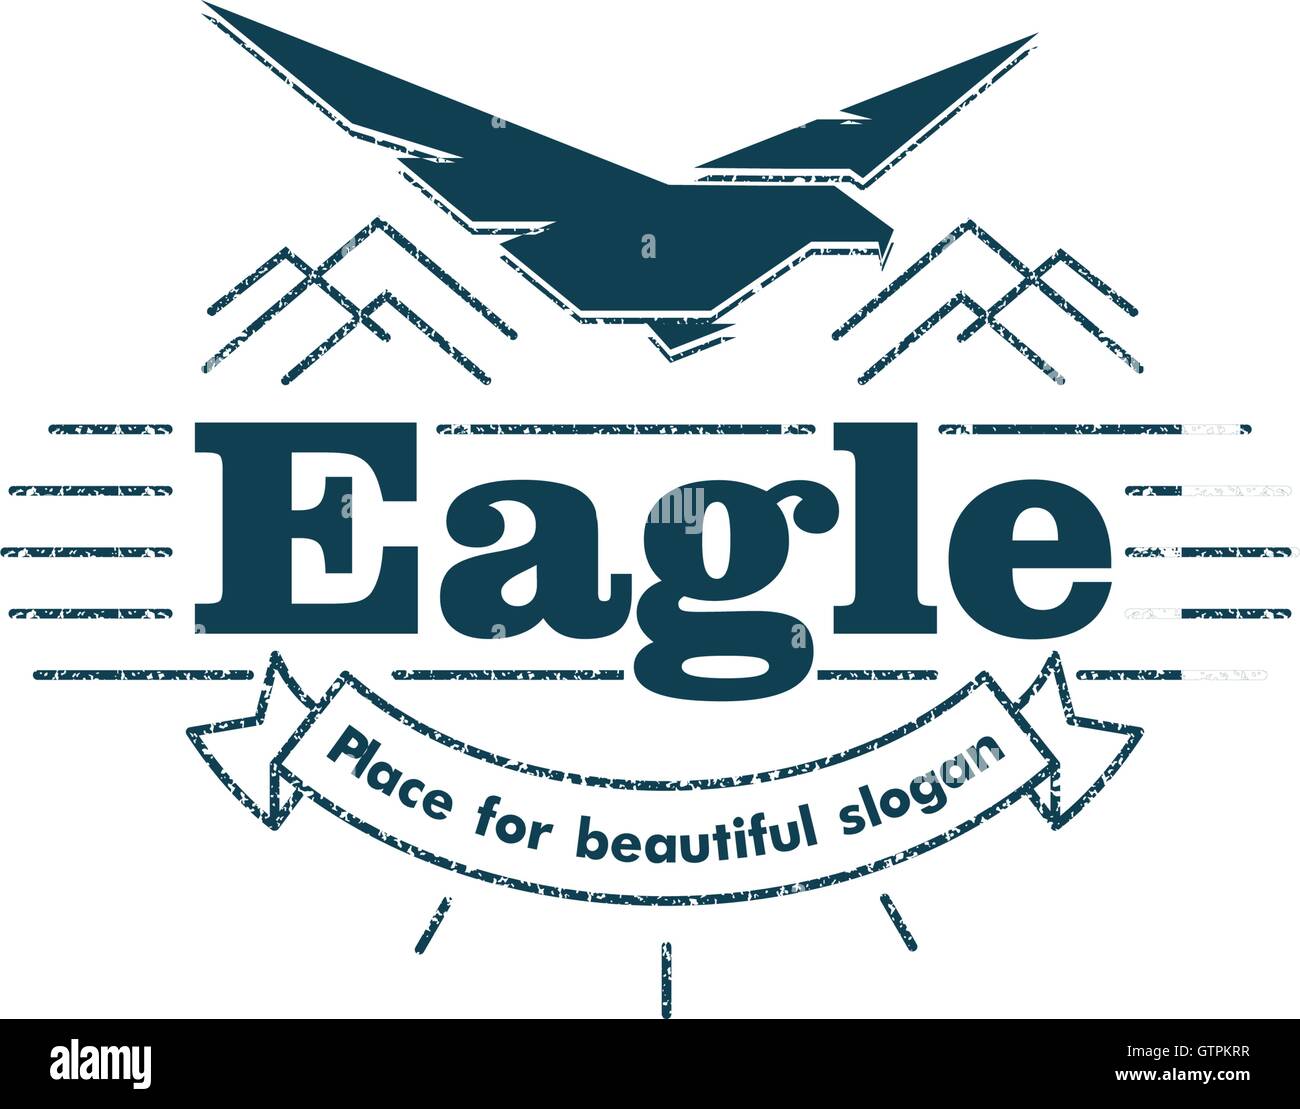 Isolated flying eagle silhouette vector logo. Bird with spead wings. American symbol. Wild nature element. Stock Vector